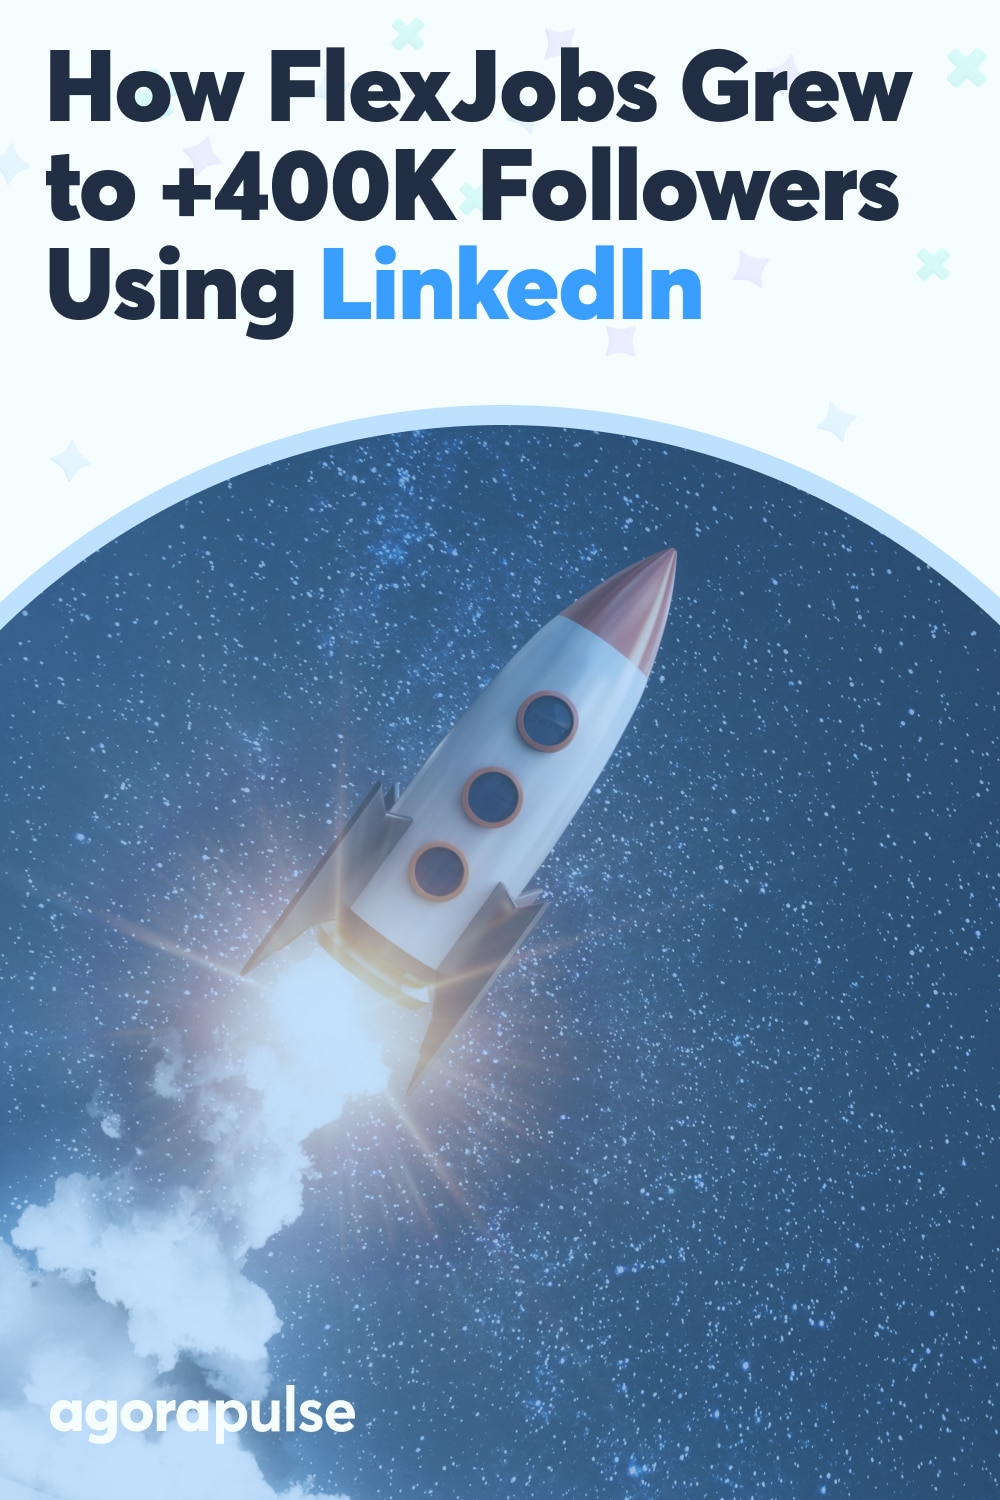 Engaging the Right Audience: How FlexJobs Grew to +400K Followers Leveraging LinkedIn